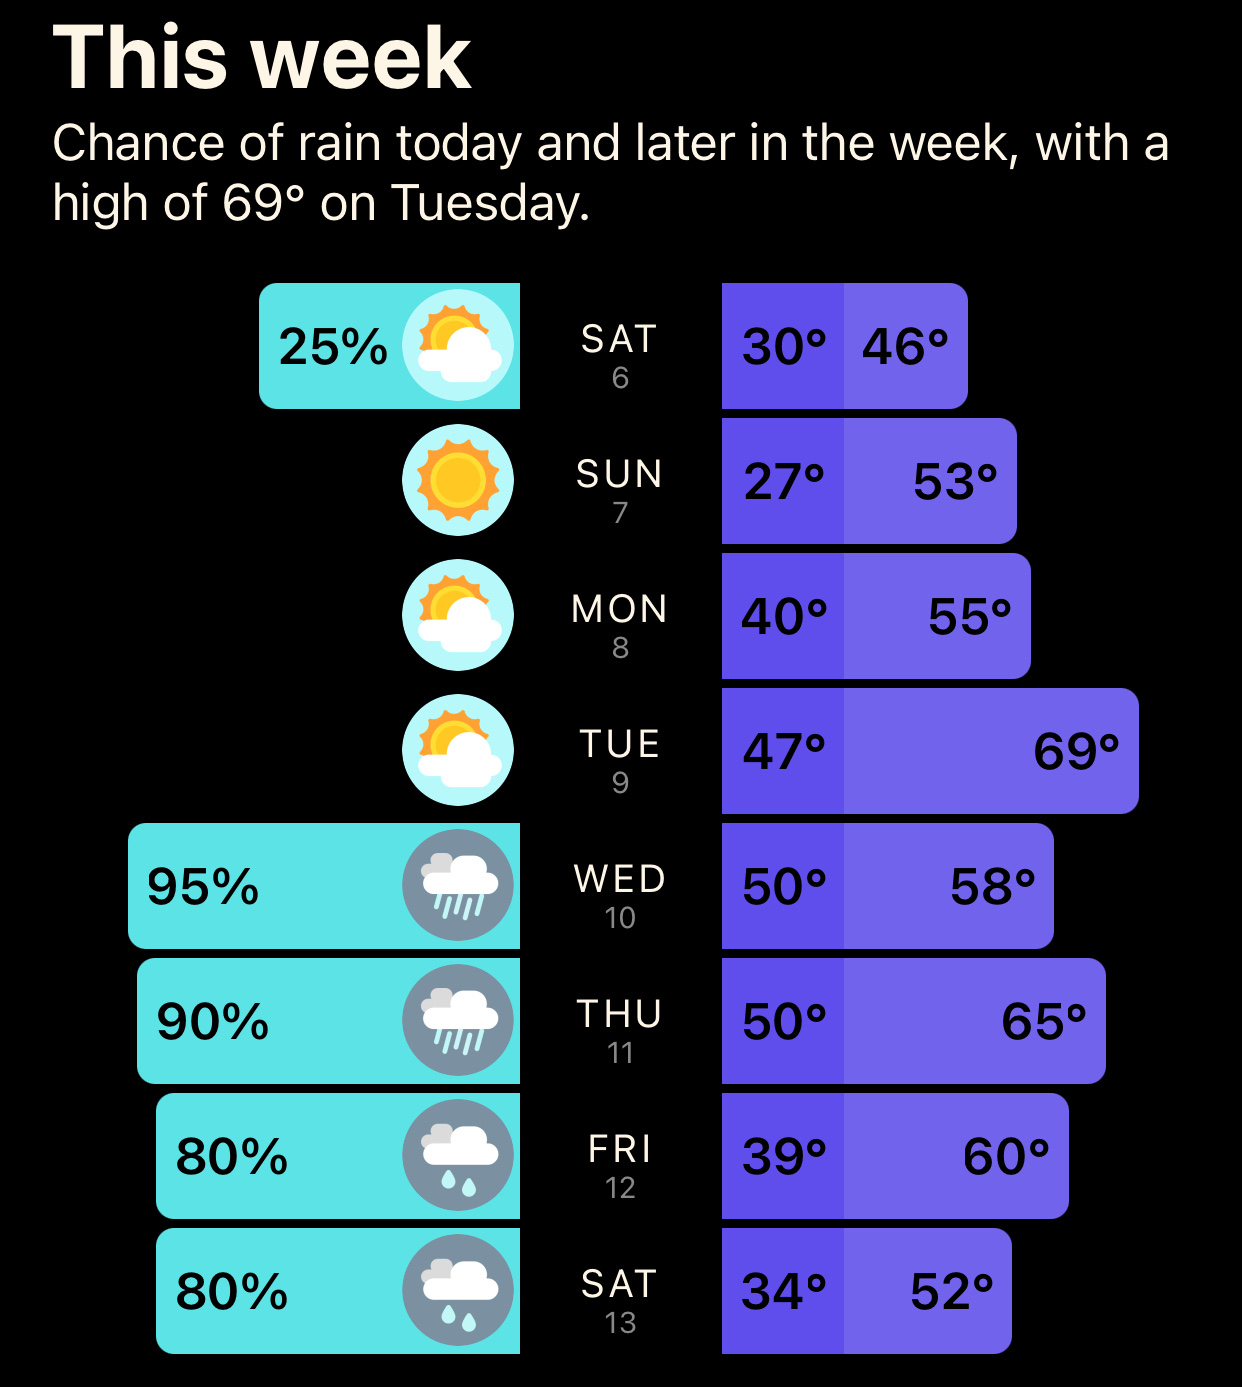 The weekly forecast showing nice weather through Tuesday, then 4 days of rain.